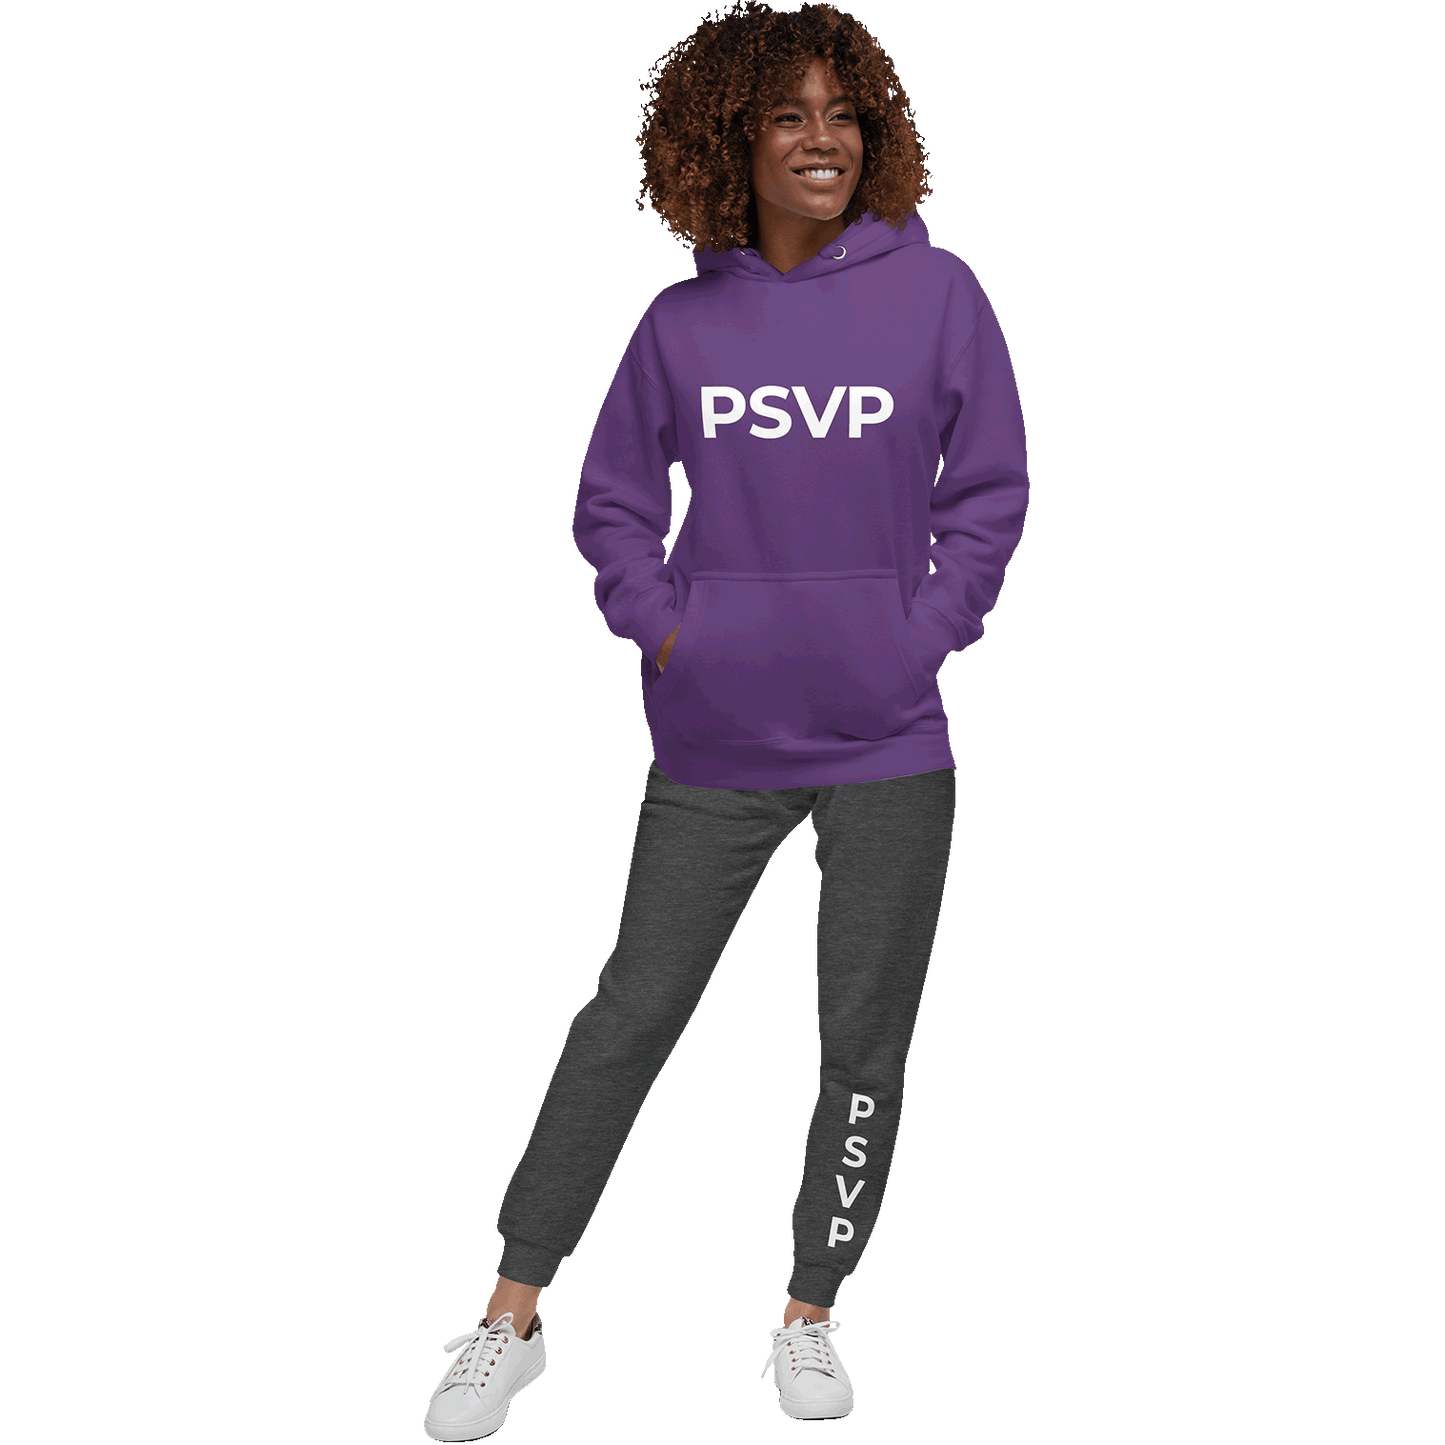 Hoodies For Her - PARADIS SVP - Hoodies are so soft and comfortable, it  will be hard to wear anything else! Matching long-sleeve Hoodies and Jogger  Pants make a perfect-fitting tracksuit set